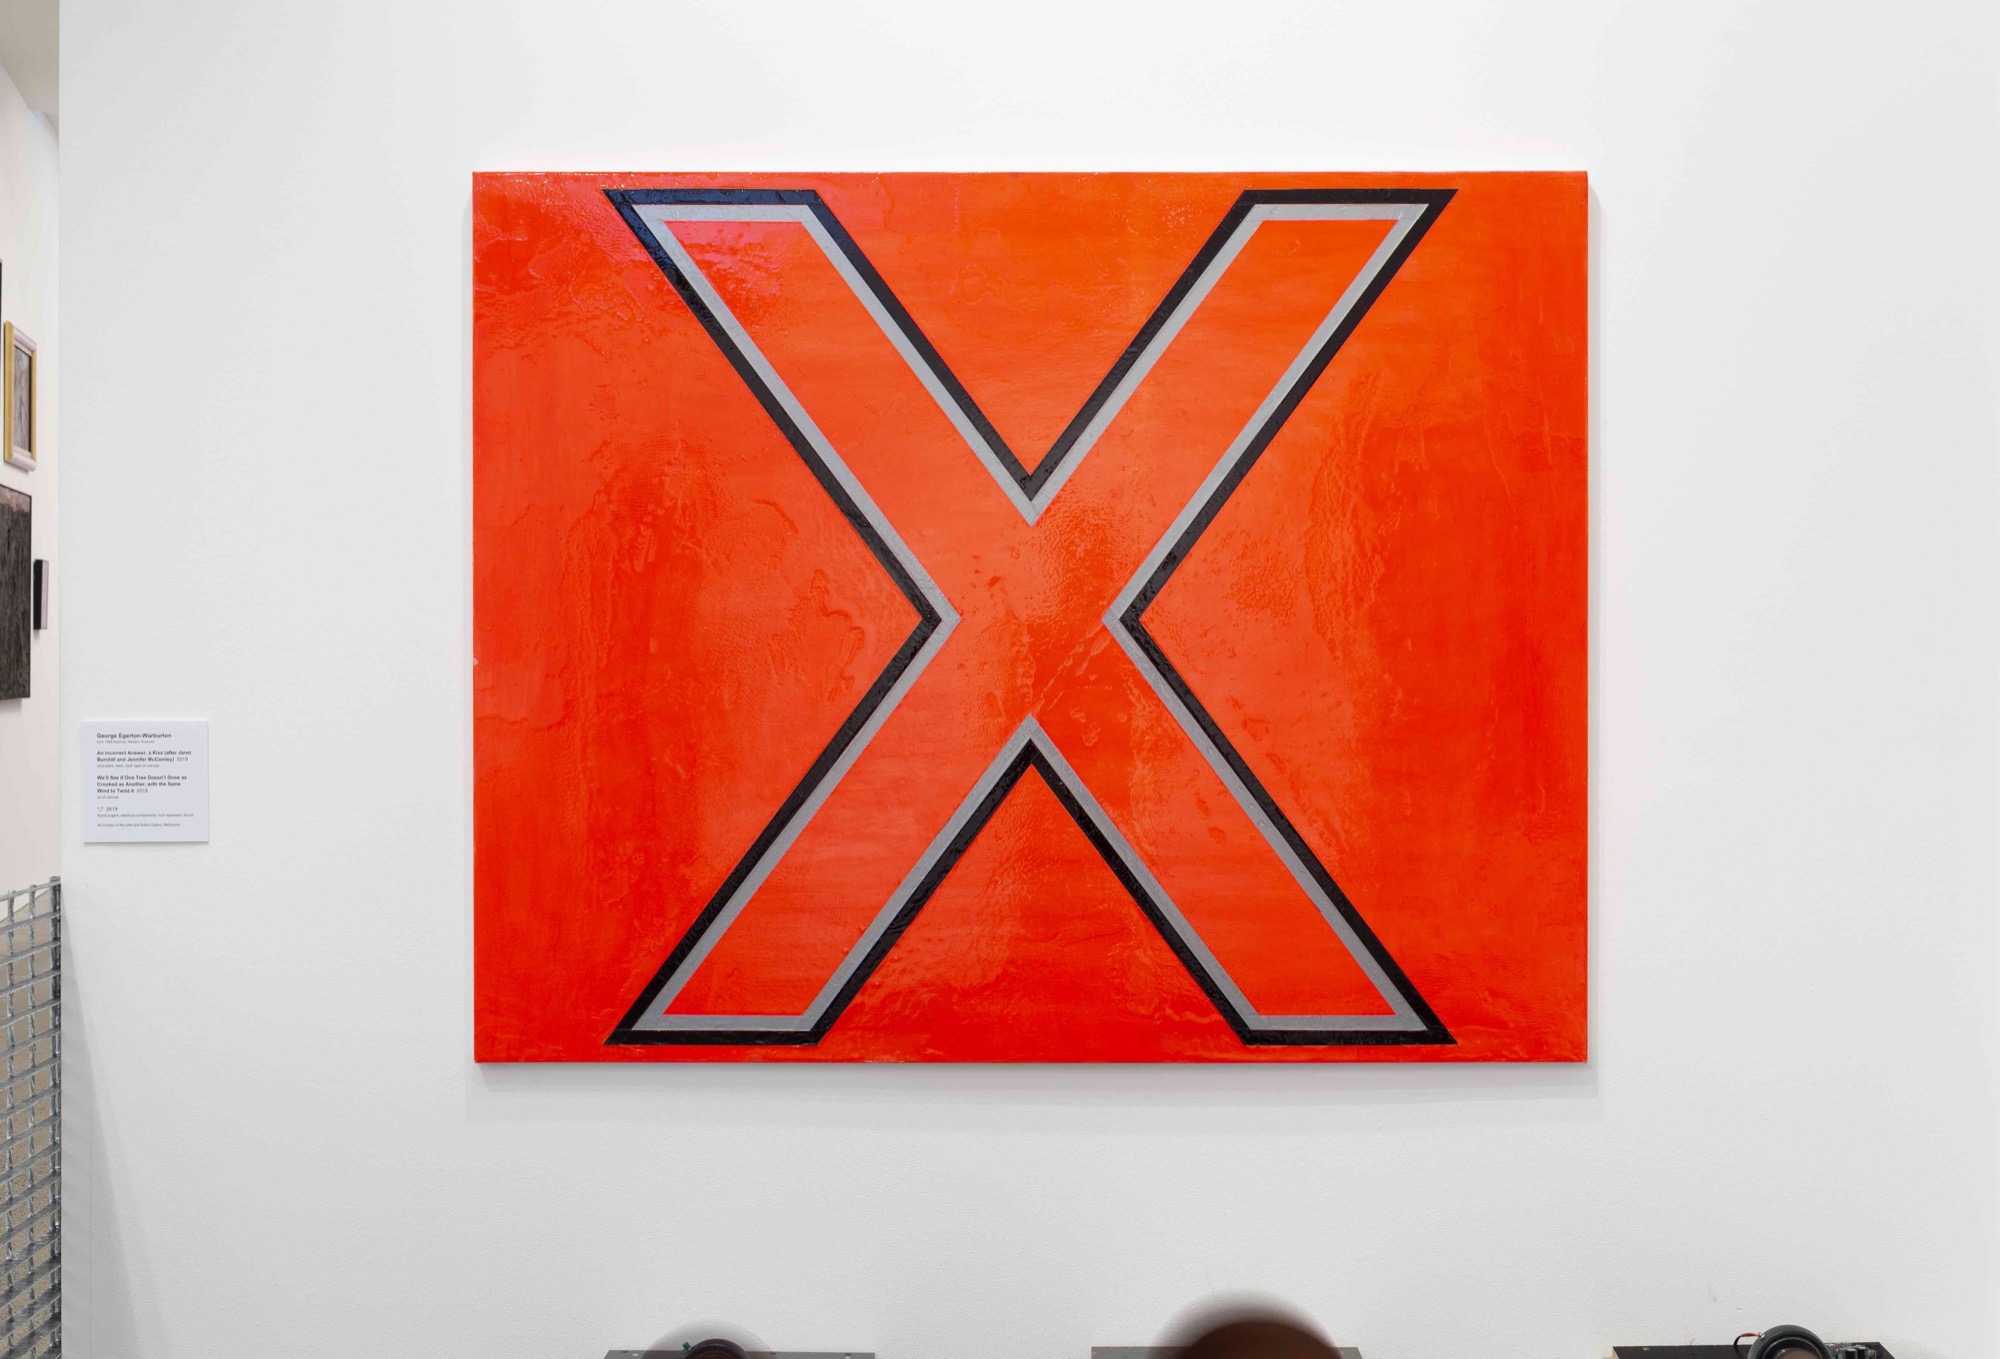 George Egerton-Warburton, <em>An Incorrect Answer, a Kiss (after Janet Burchill and Jennifer McCamley)</em>, 2019, vinyl paint, resin, cloth tape on canvas, 120 x 150 cm, Courtesy of the artist and Sutton Gallery, Melbourne.